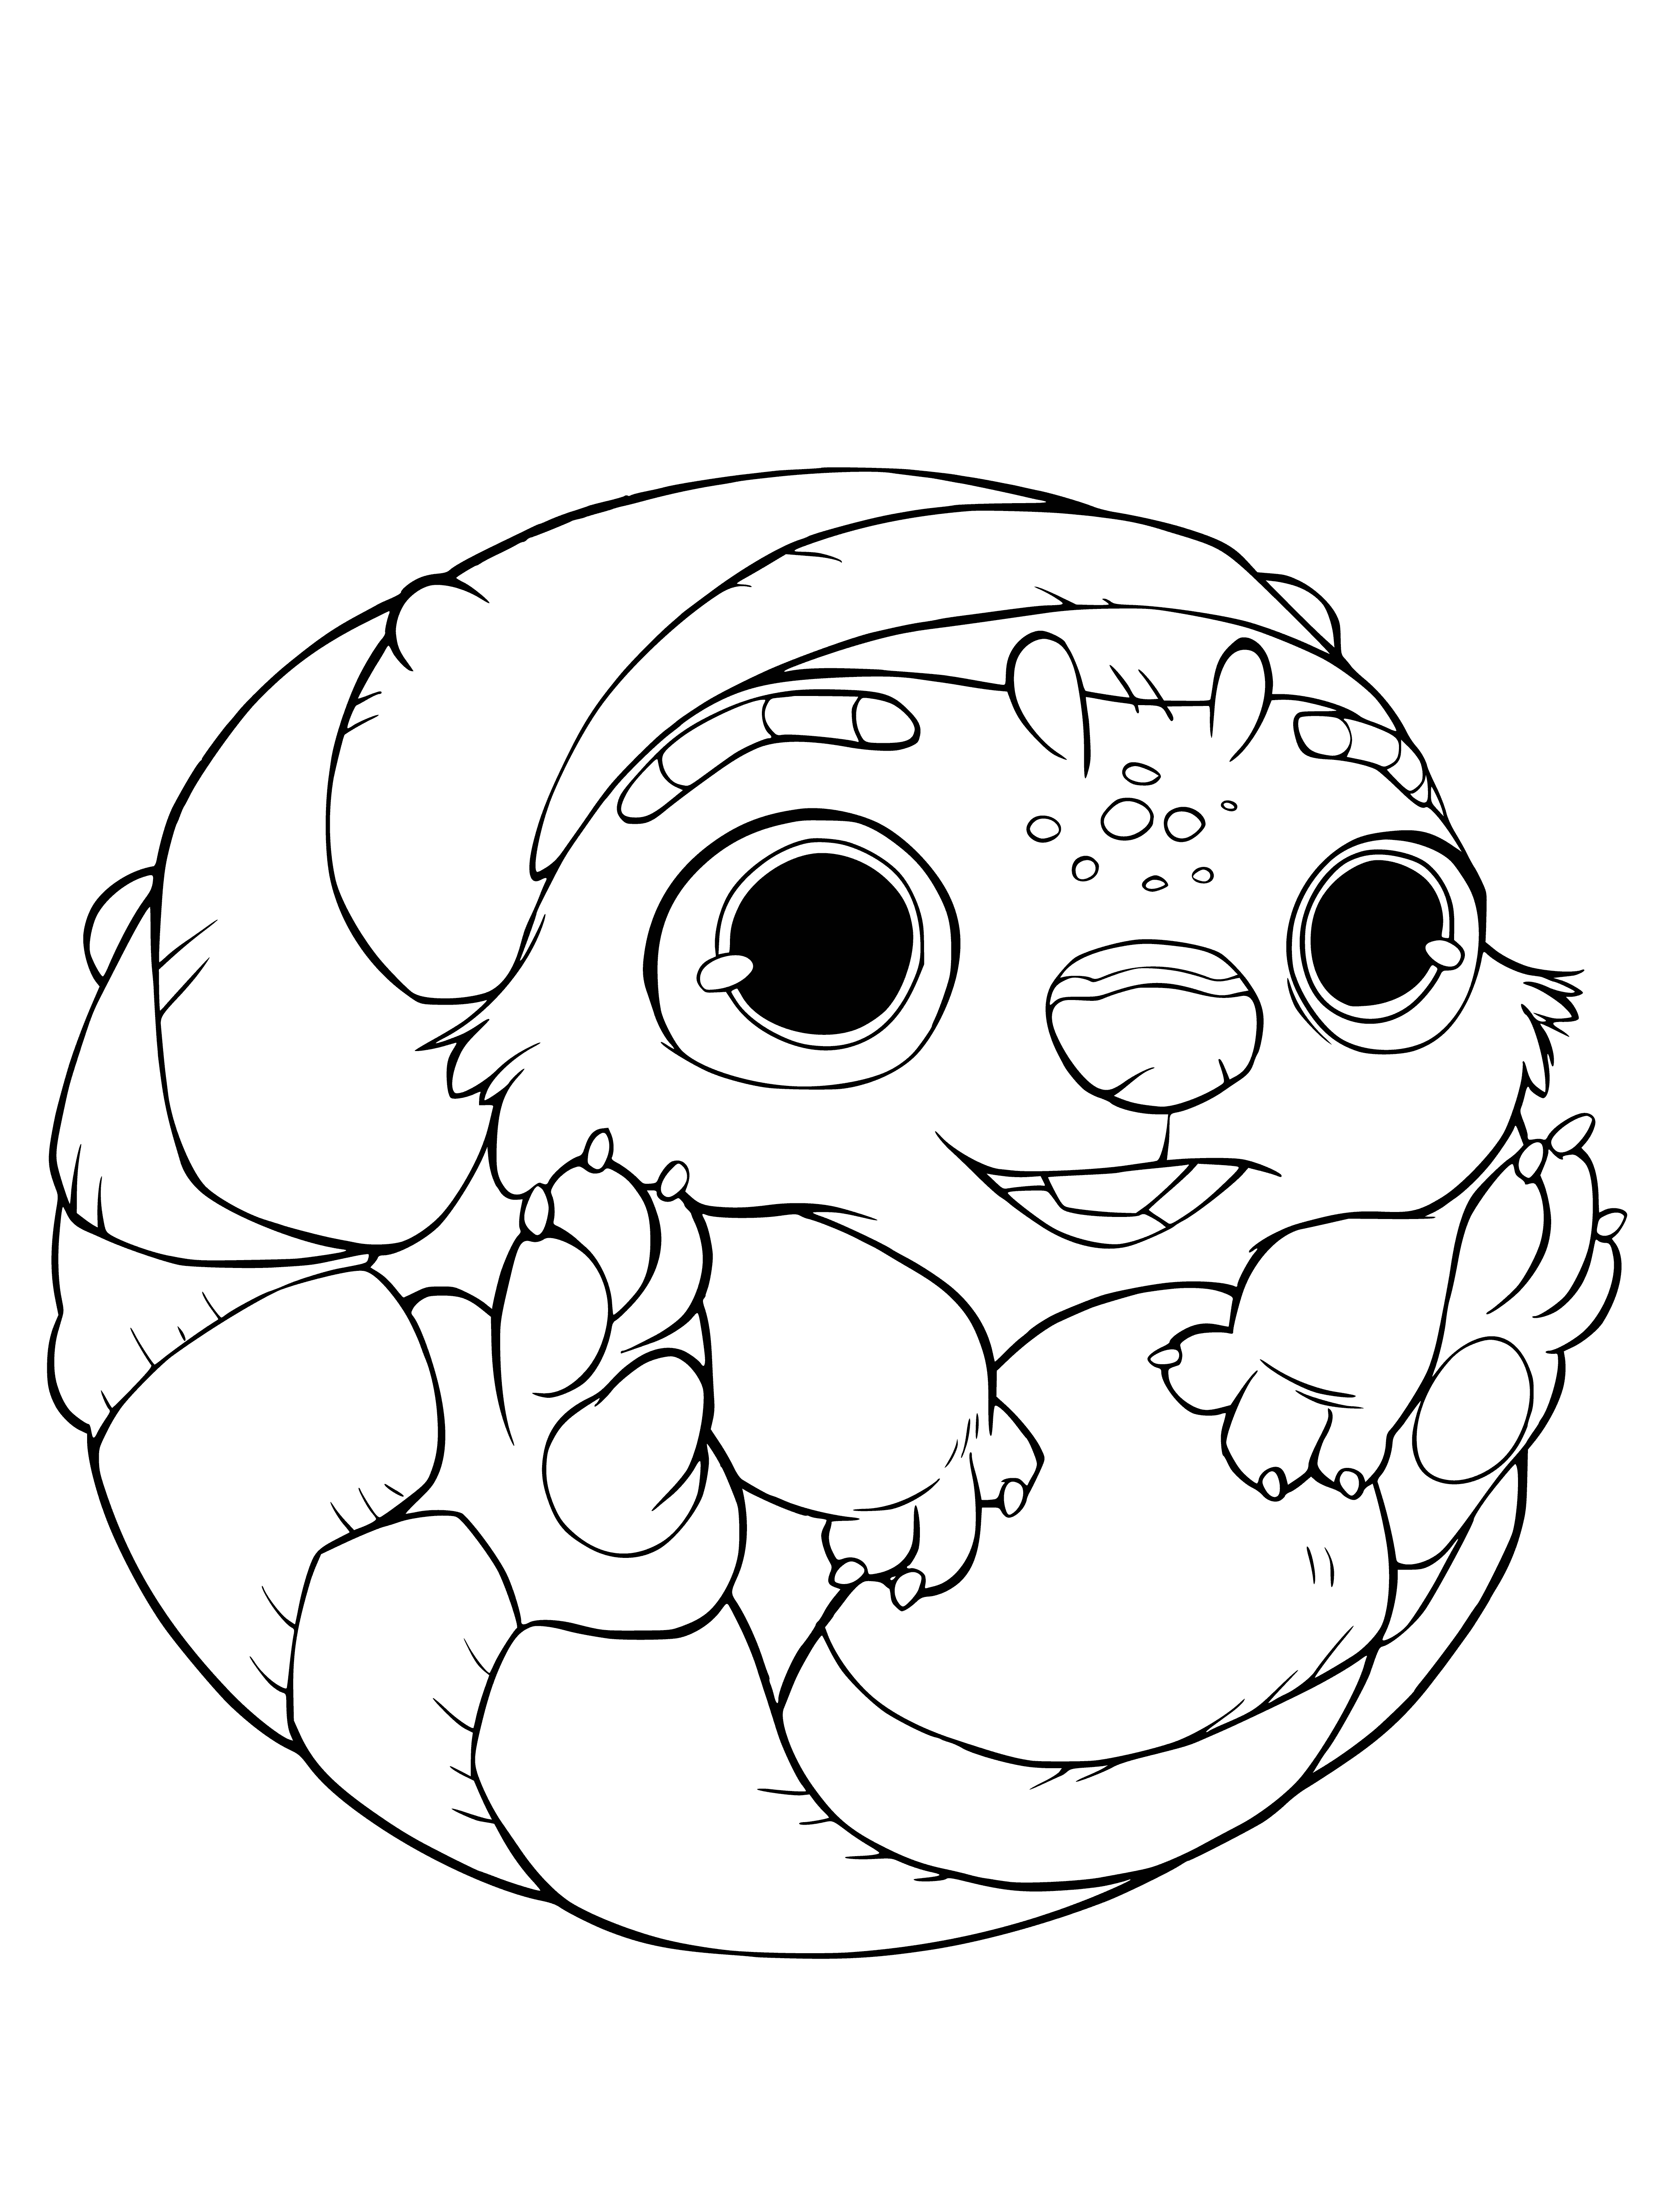 Kid Knock Knock coloring page